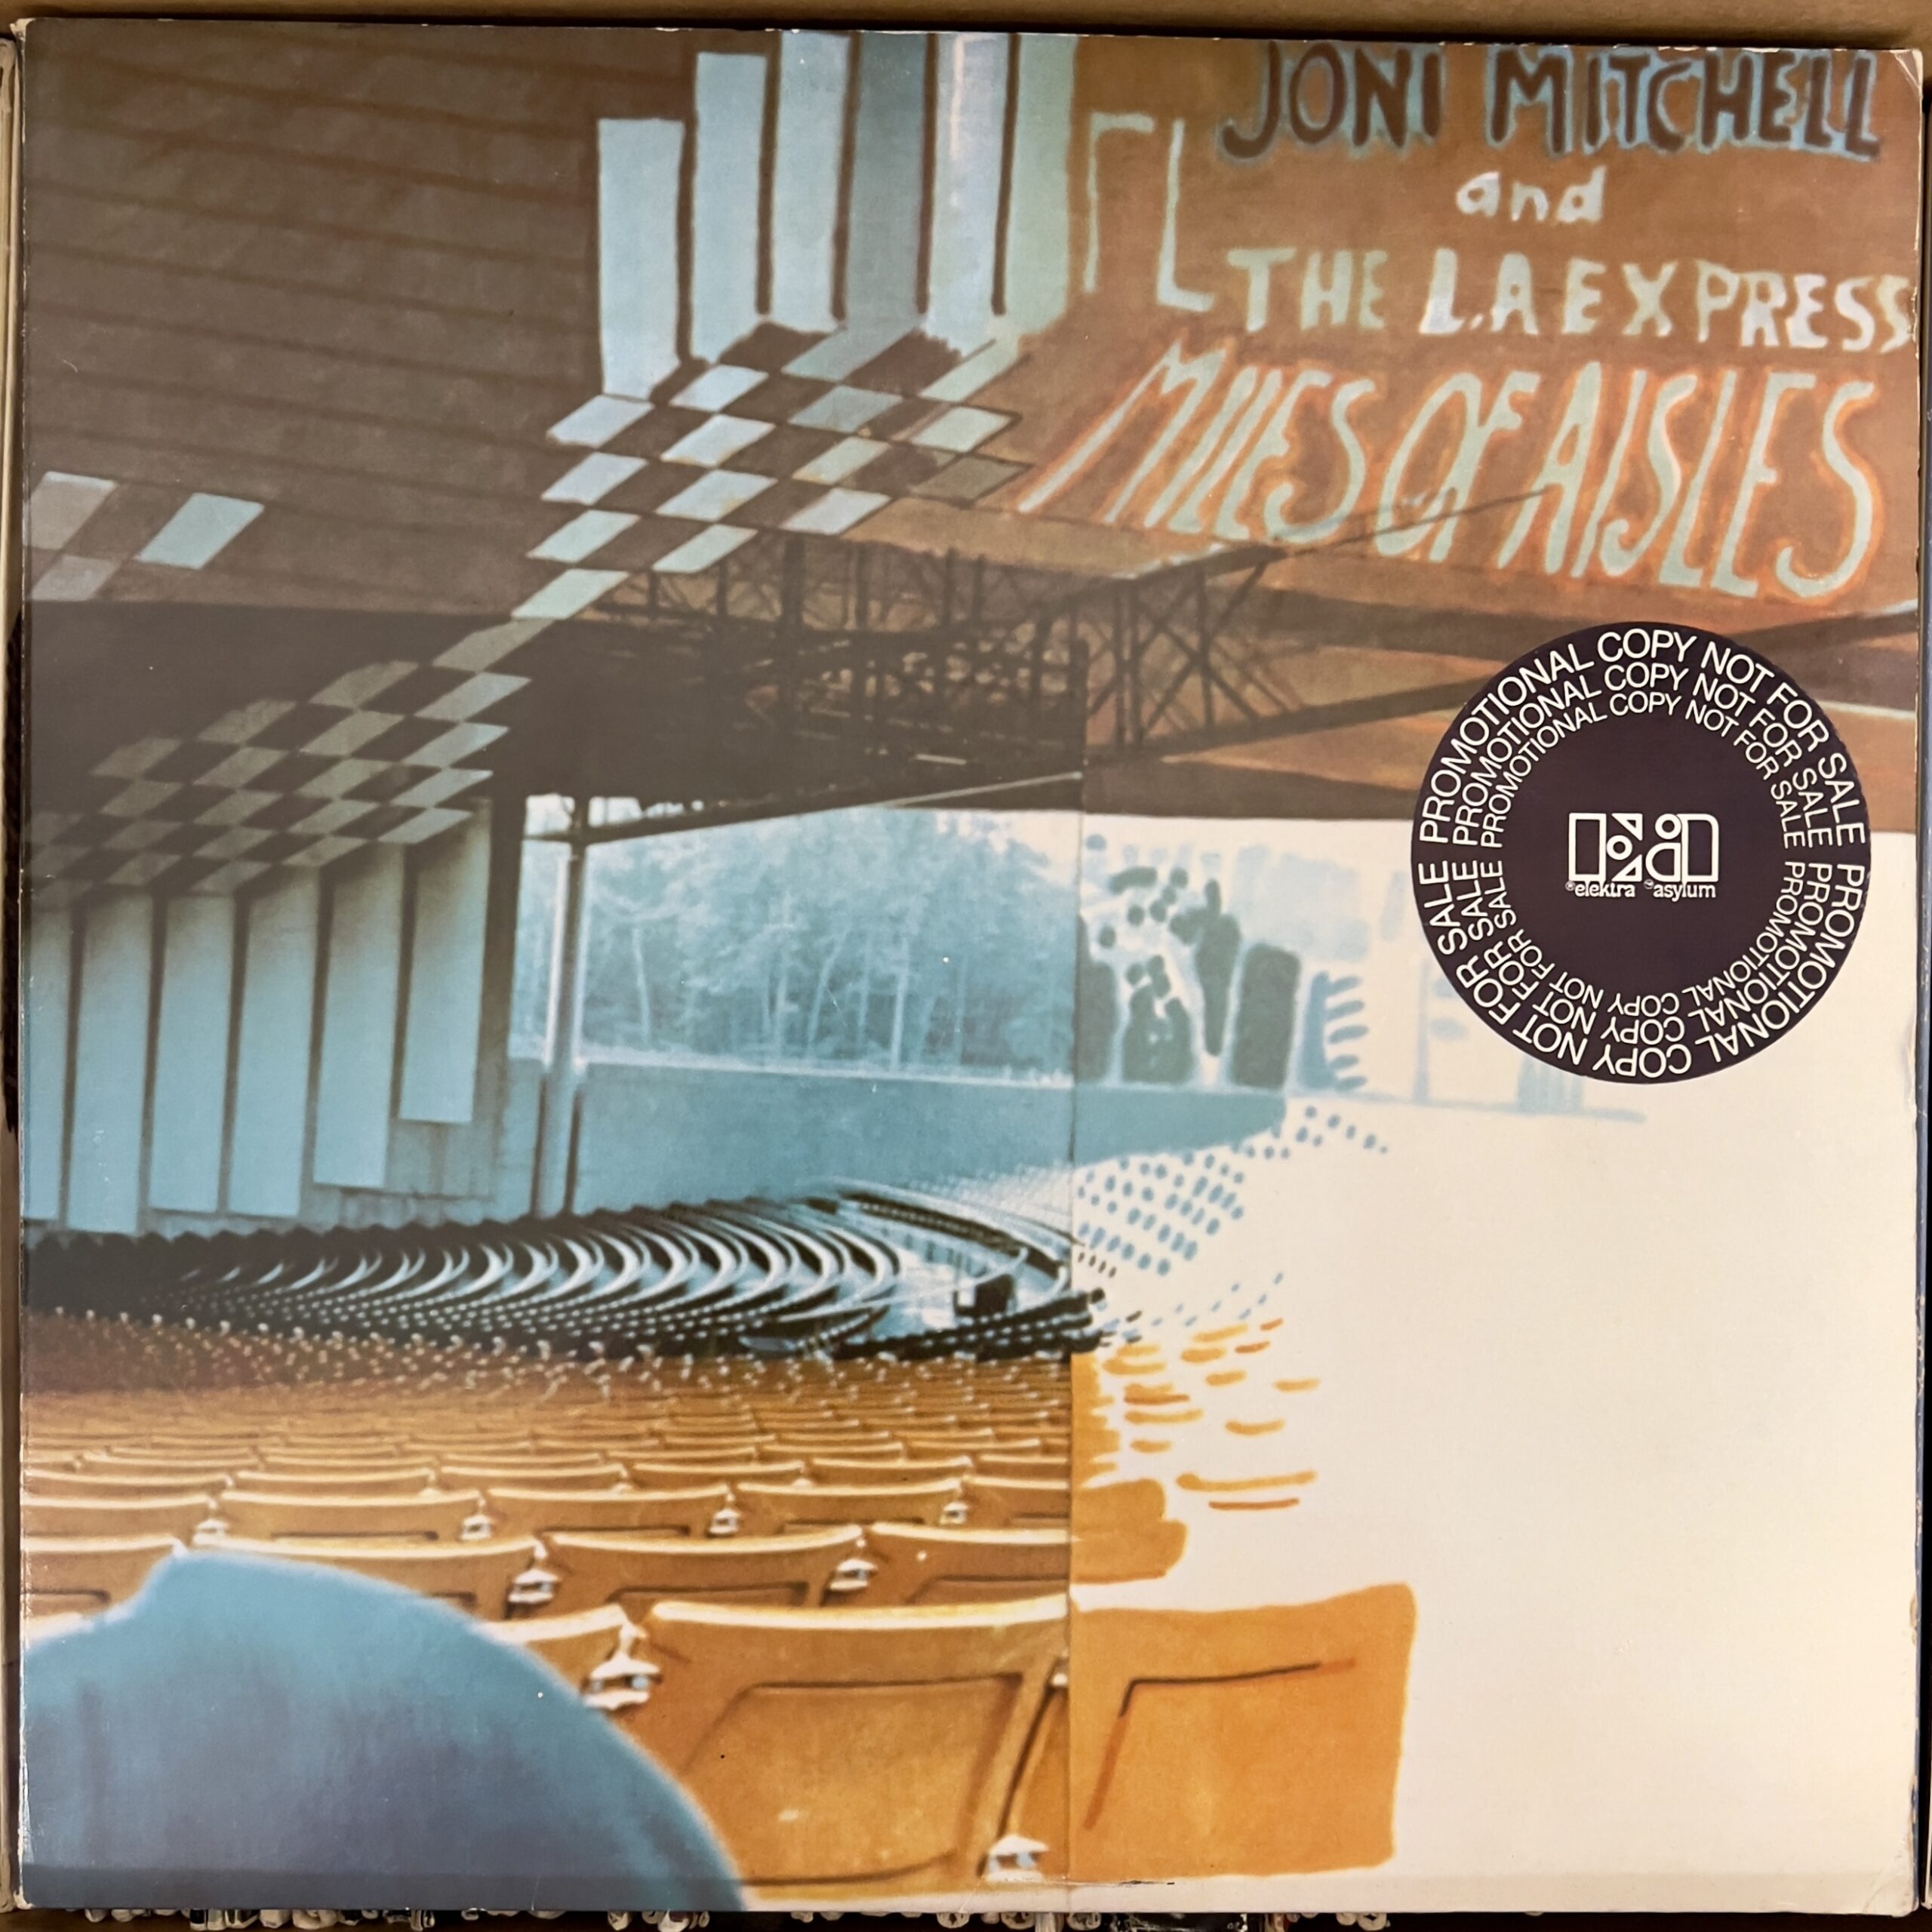 Miles of Aisles by Joni Mitchell and the L.A. Express